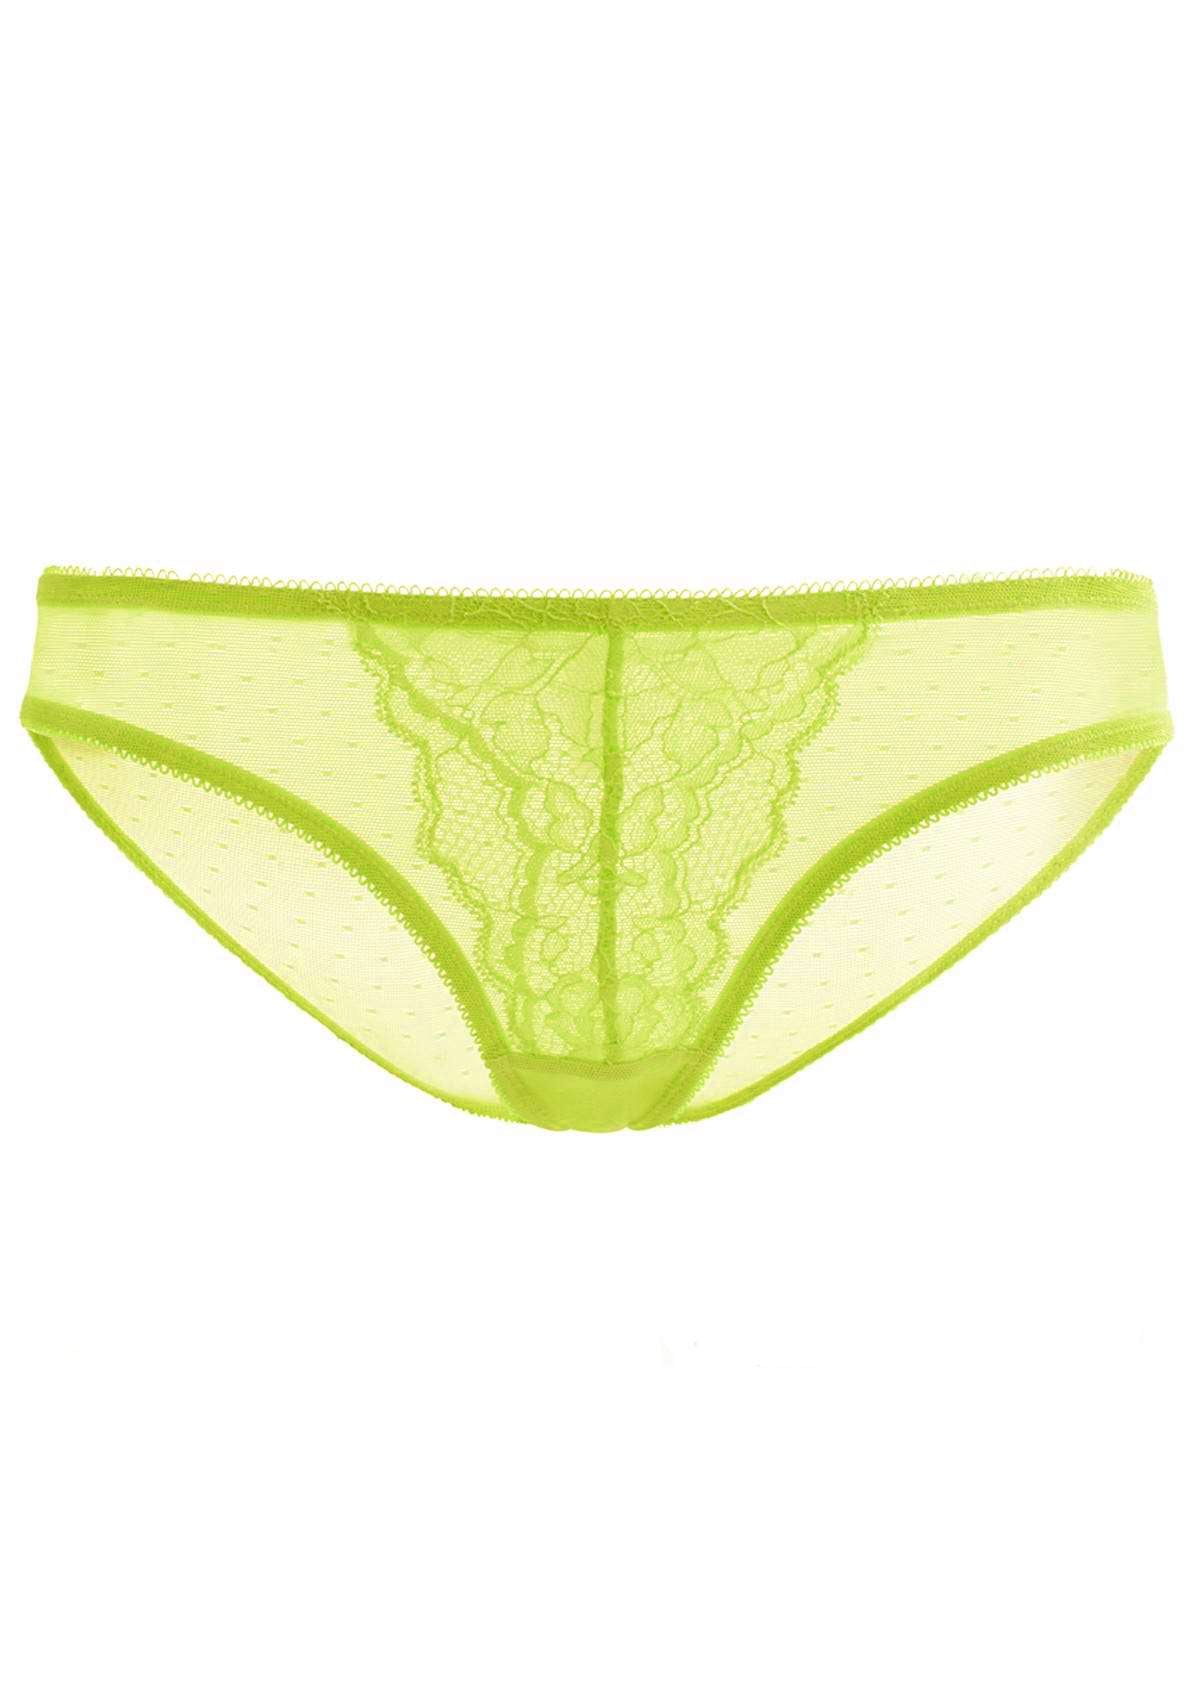 HSIA Enchante Mid-Rise Sheer Lace Mesh Delicate Airy Panty Underwear - L / Lime Green